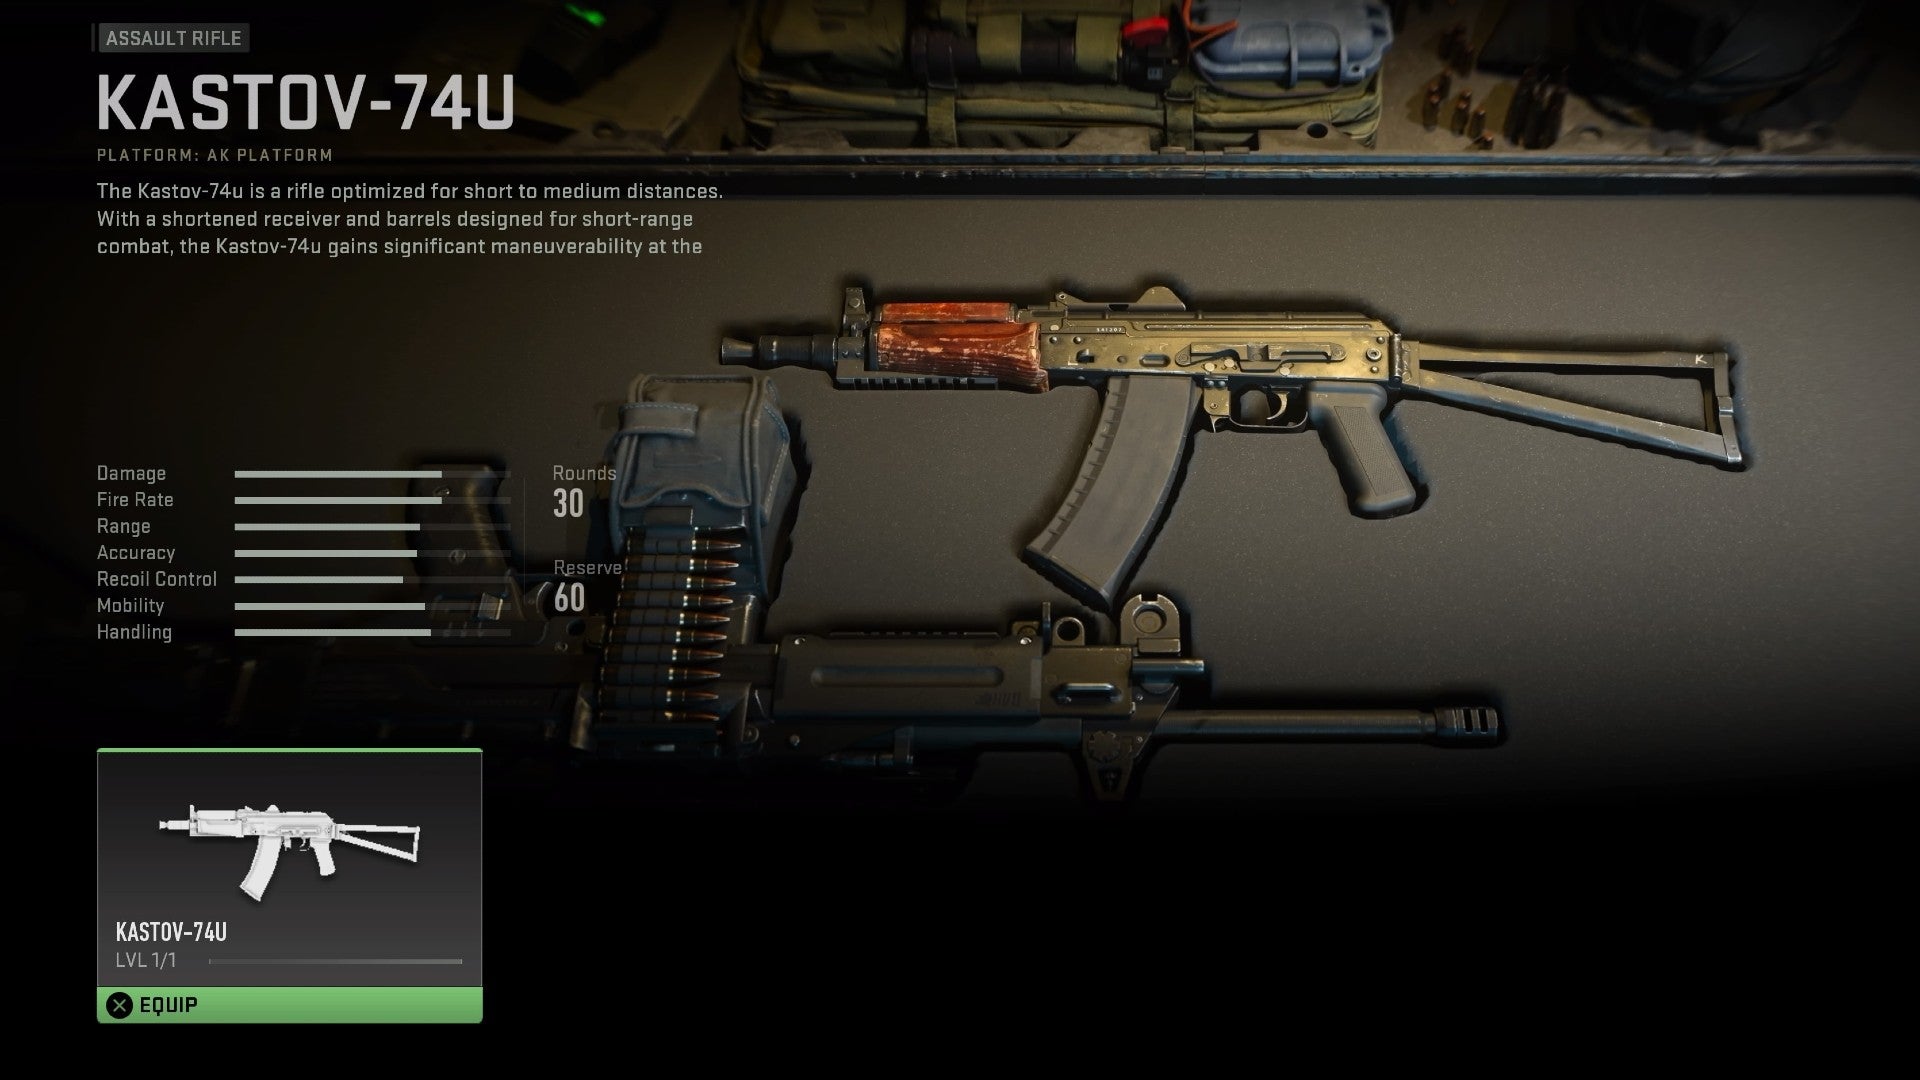 Modern Warfare 2 beta screenshot showing Kastov in a weapons container, with stats on the left.